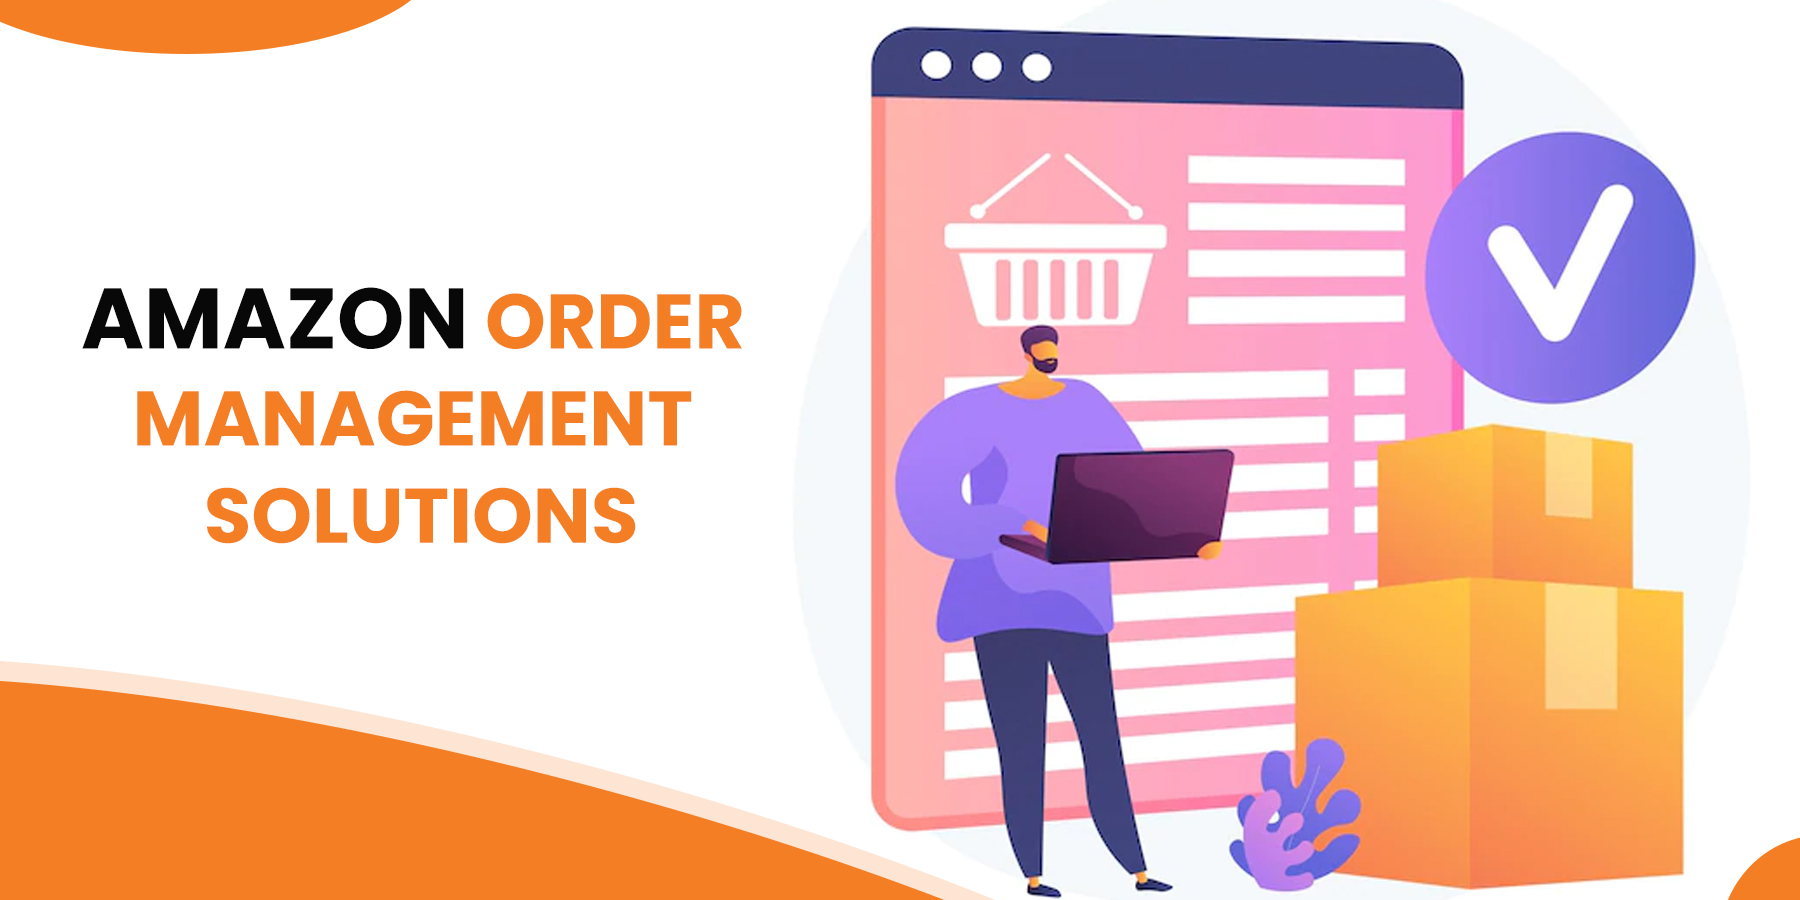 Amazon Order Management Solutions